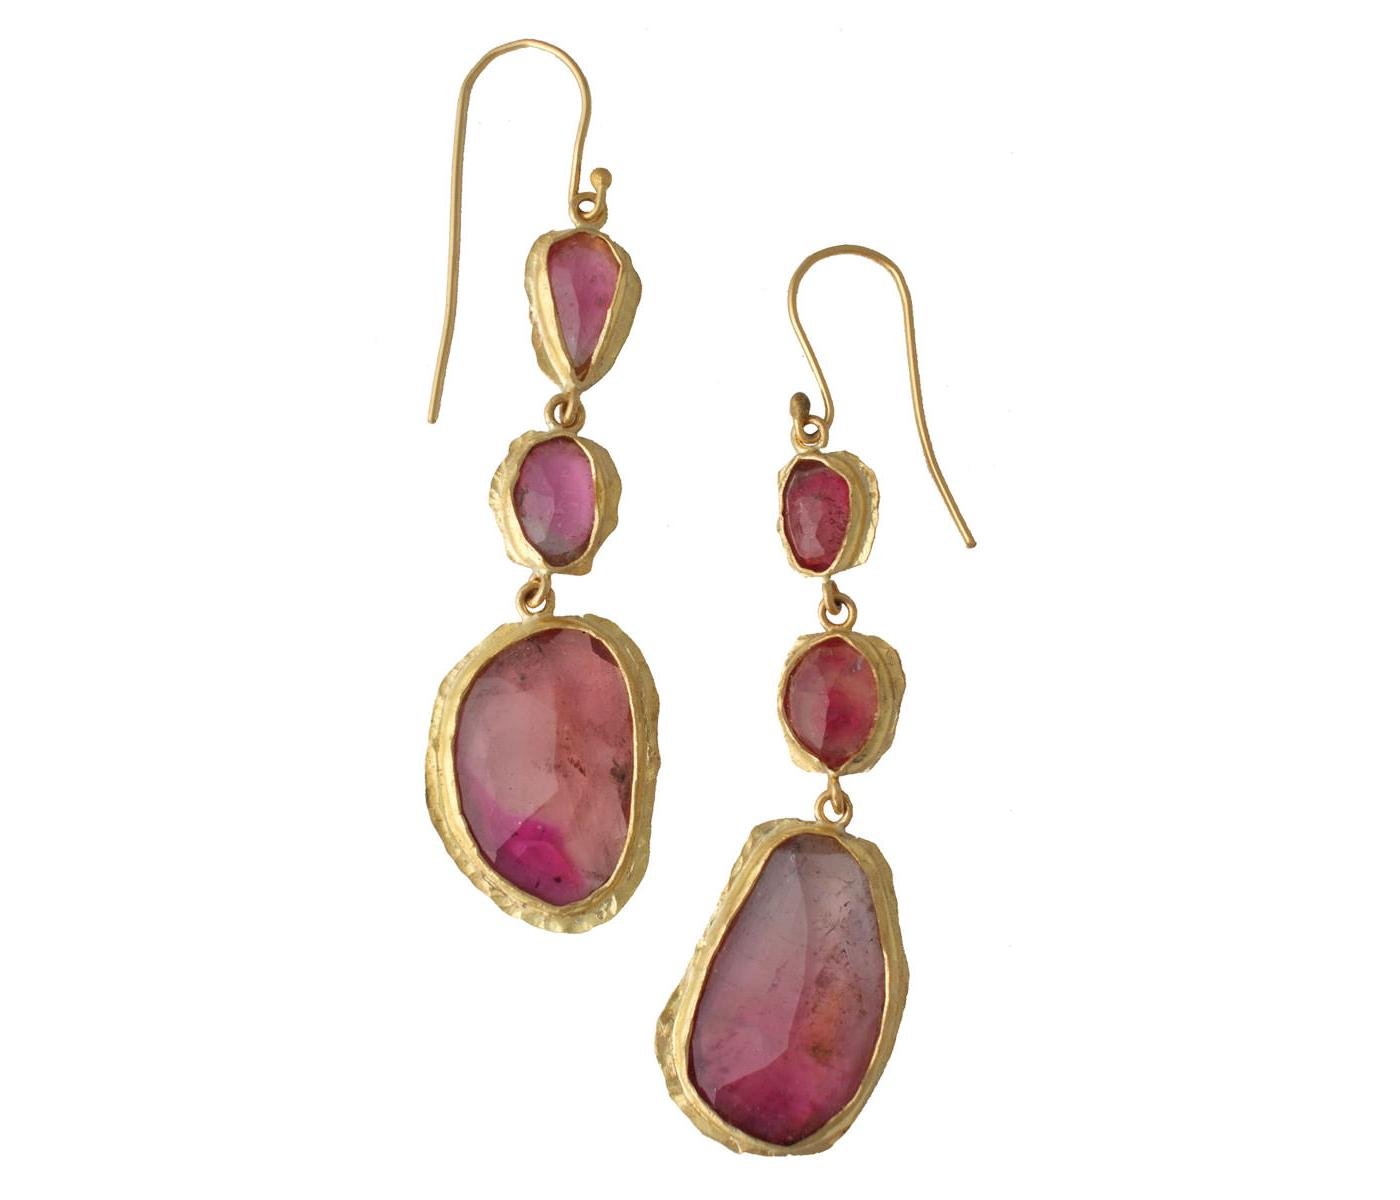 Earrings by Margery Hirschey